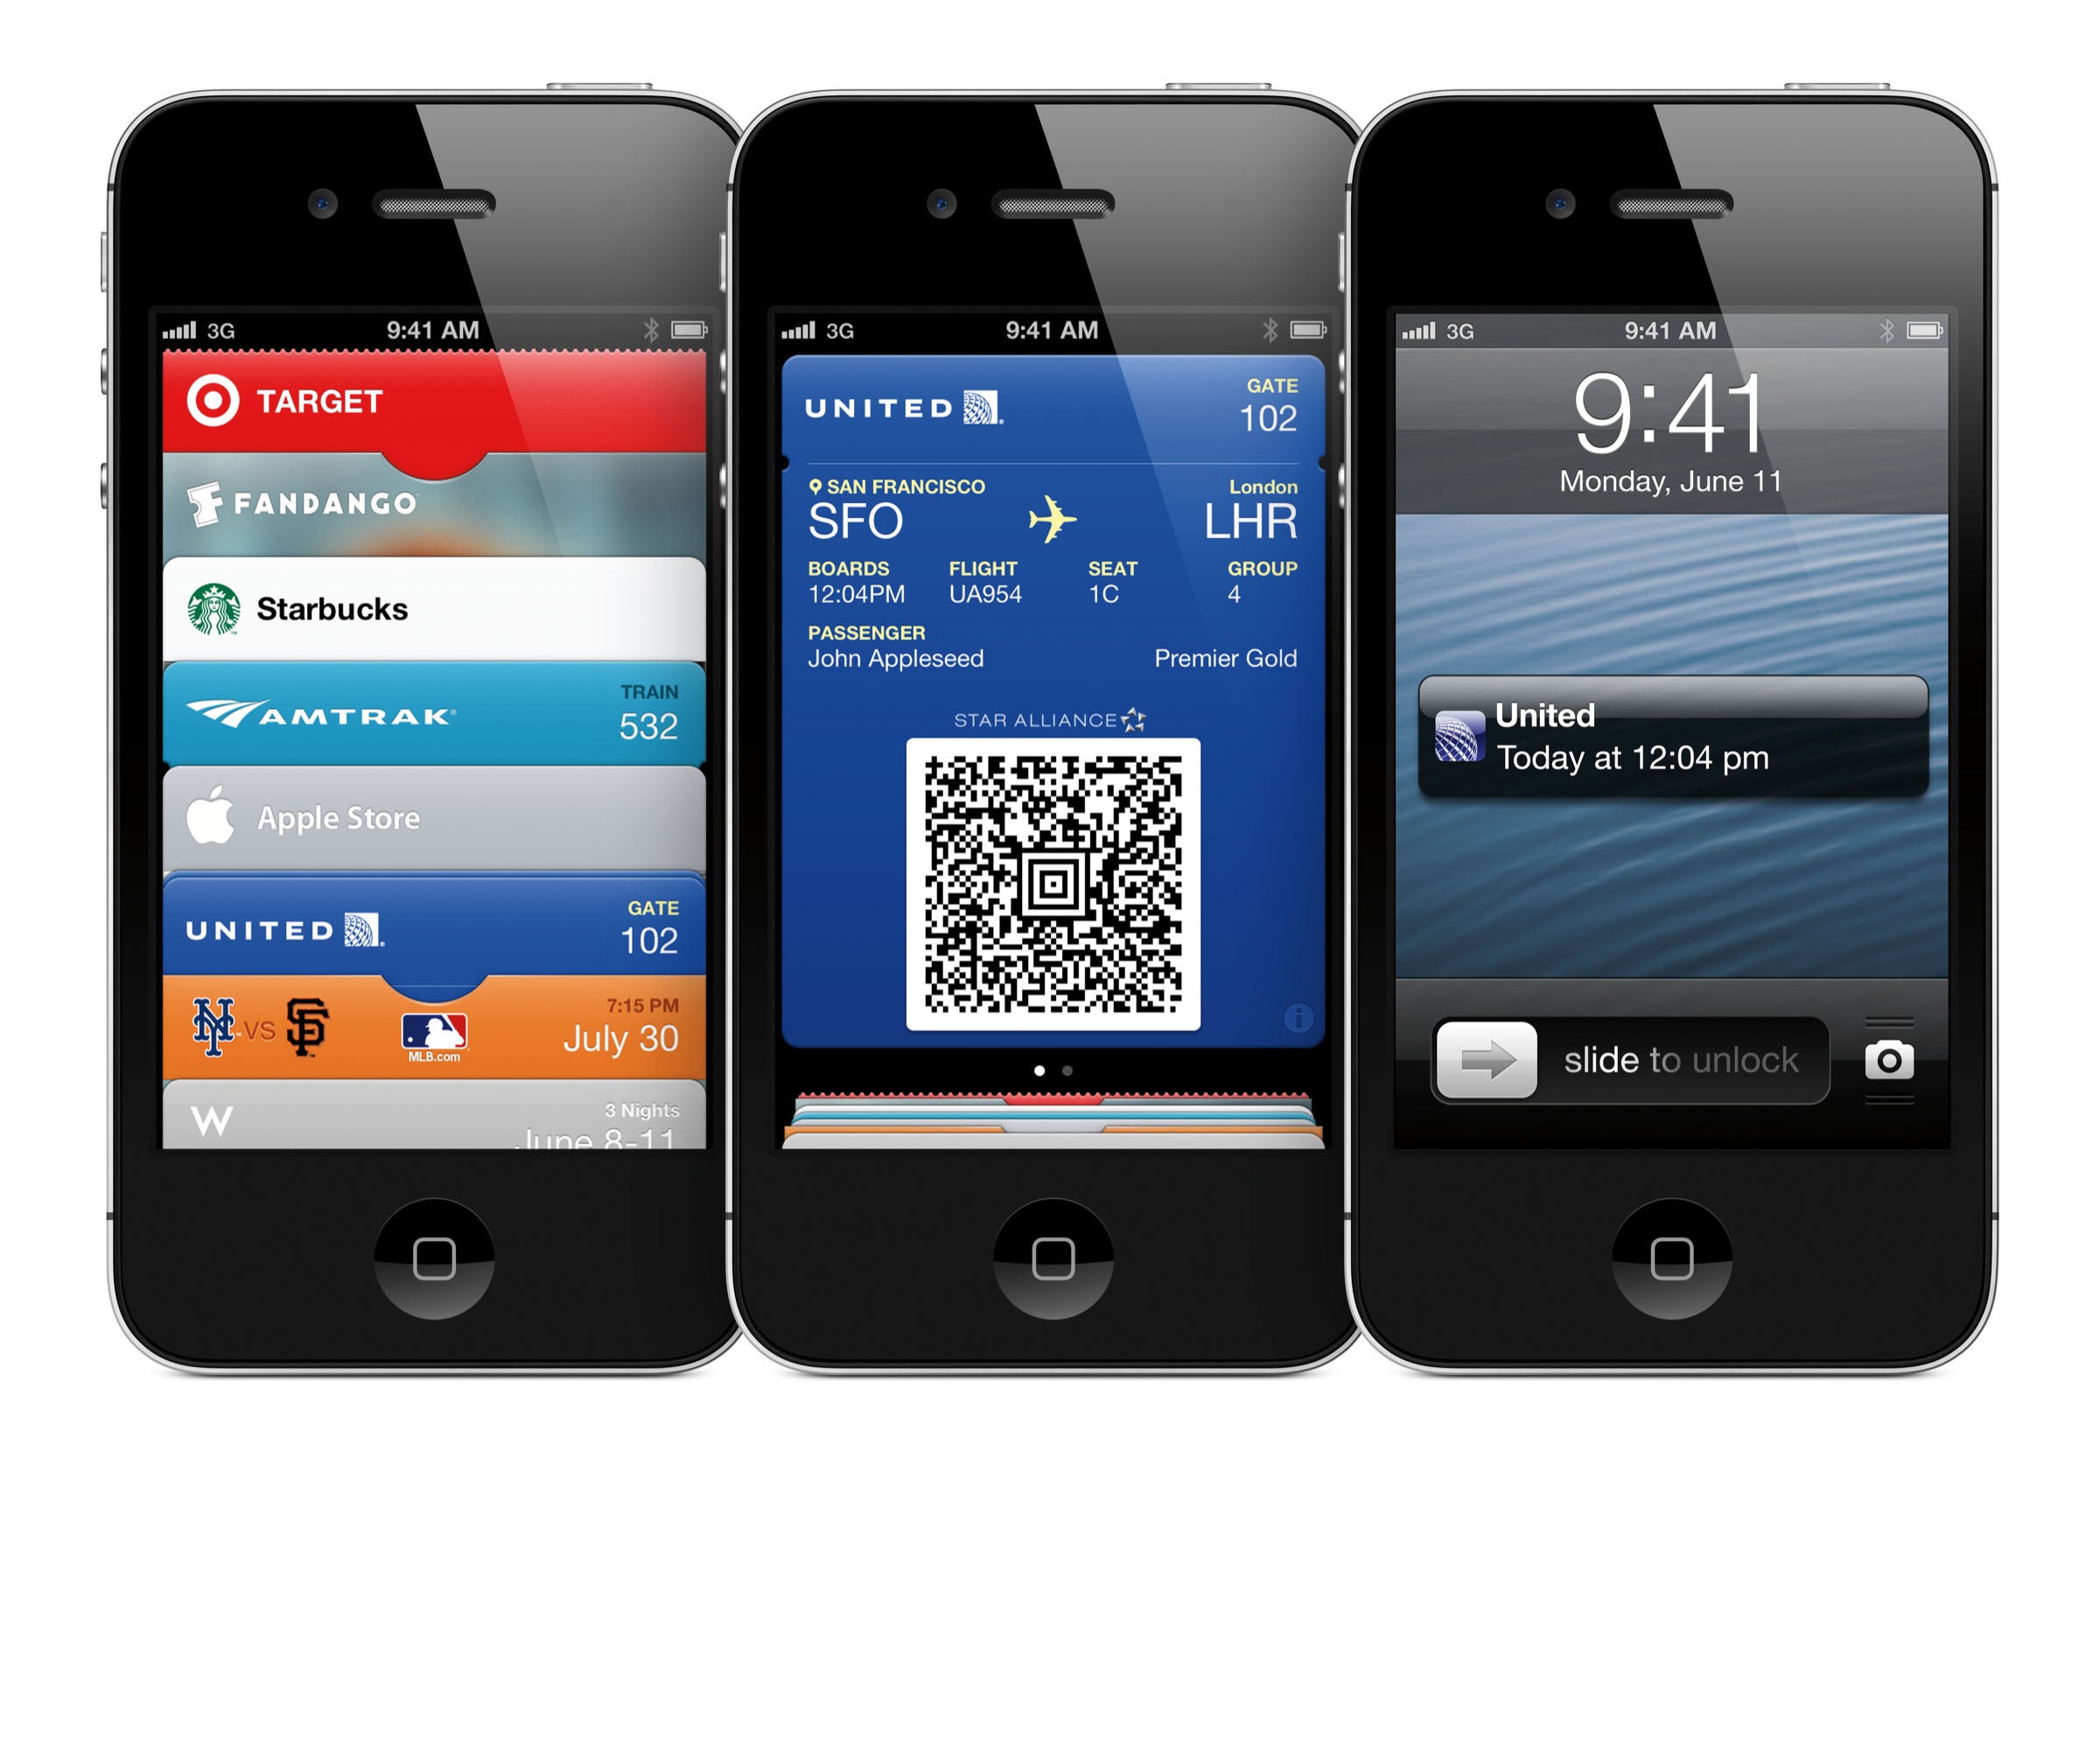 What’s The Deal With iPhone’s Passbook?